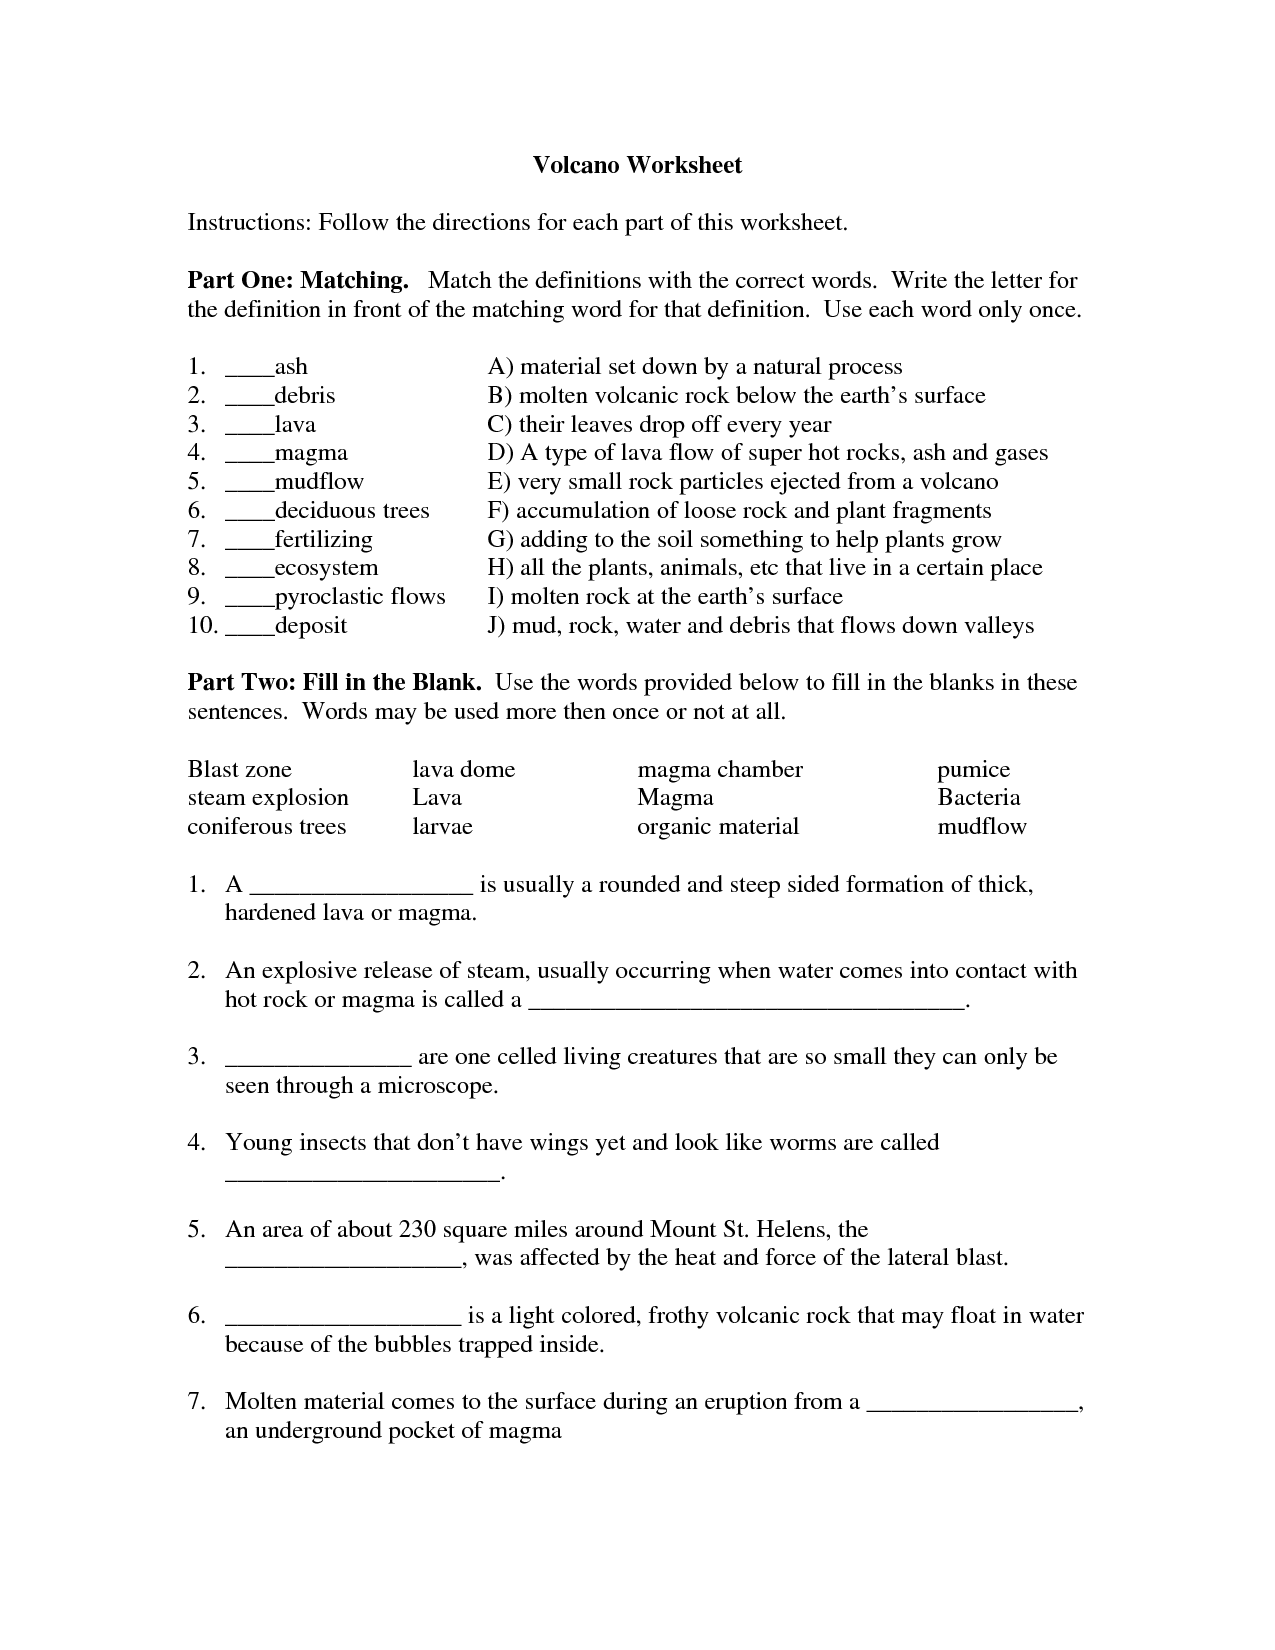 17 Best Images of Middle School Science Worksheets PDF - Physical